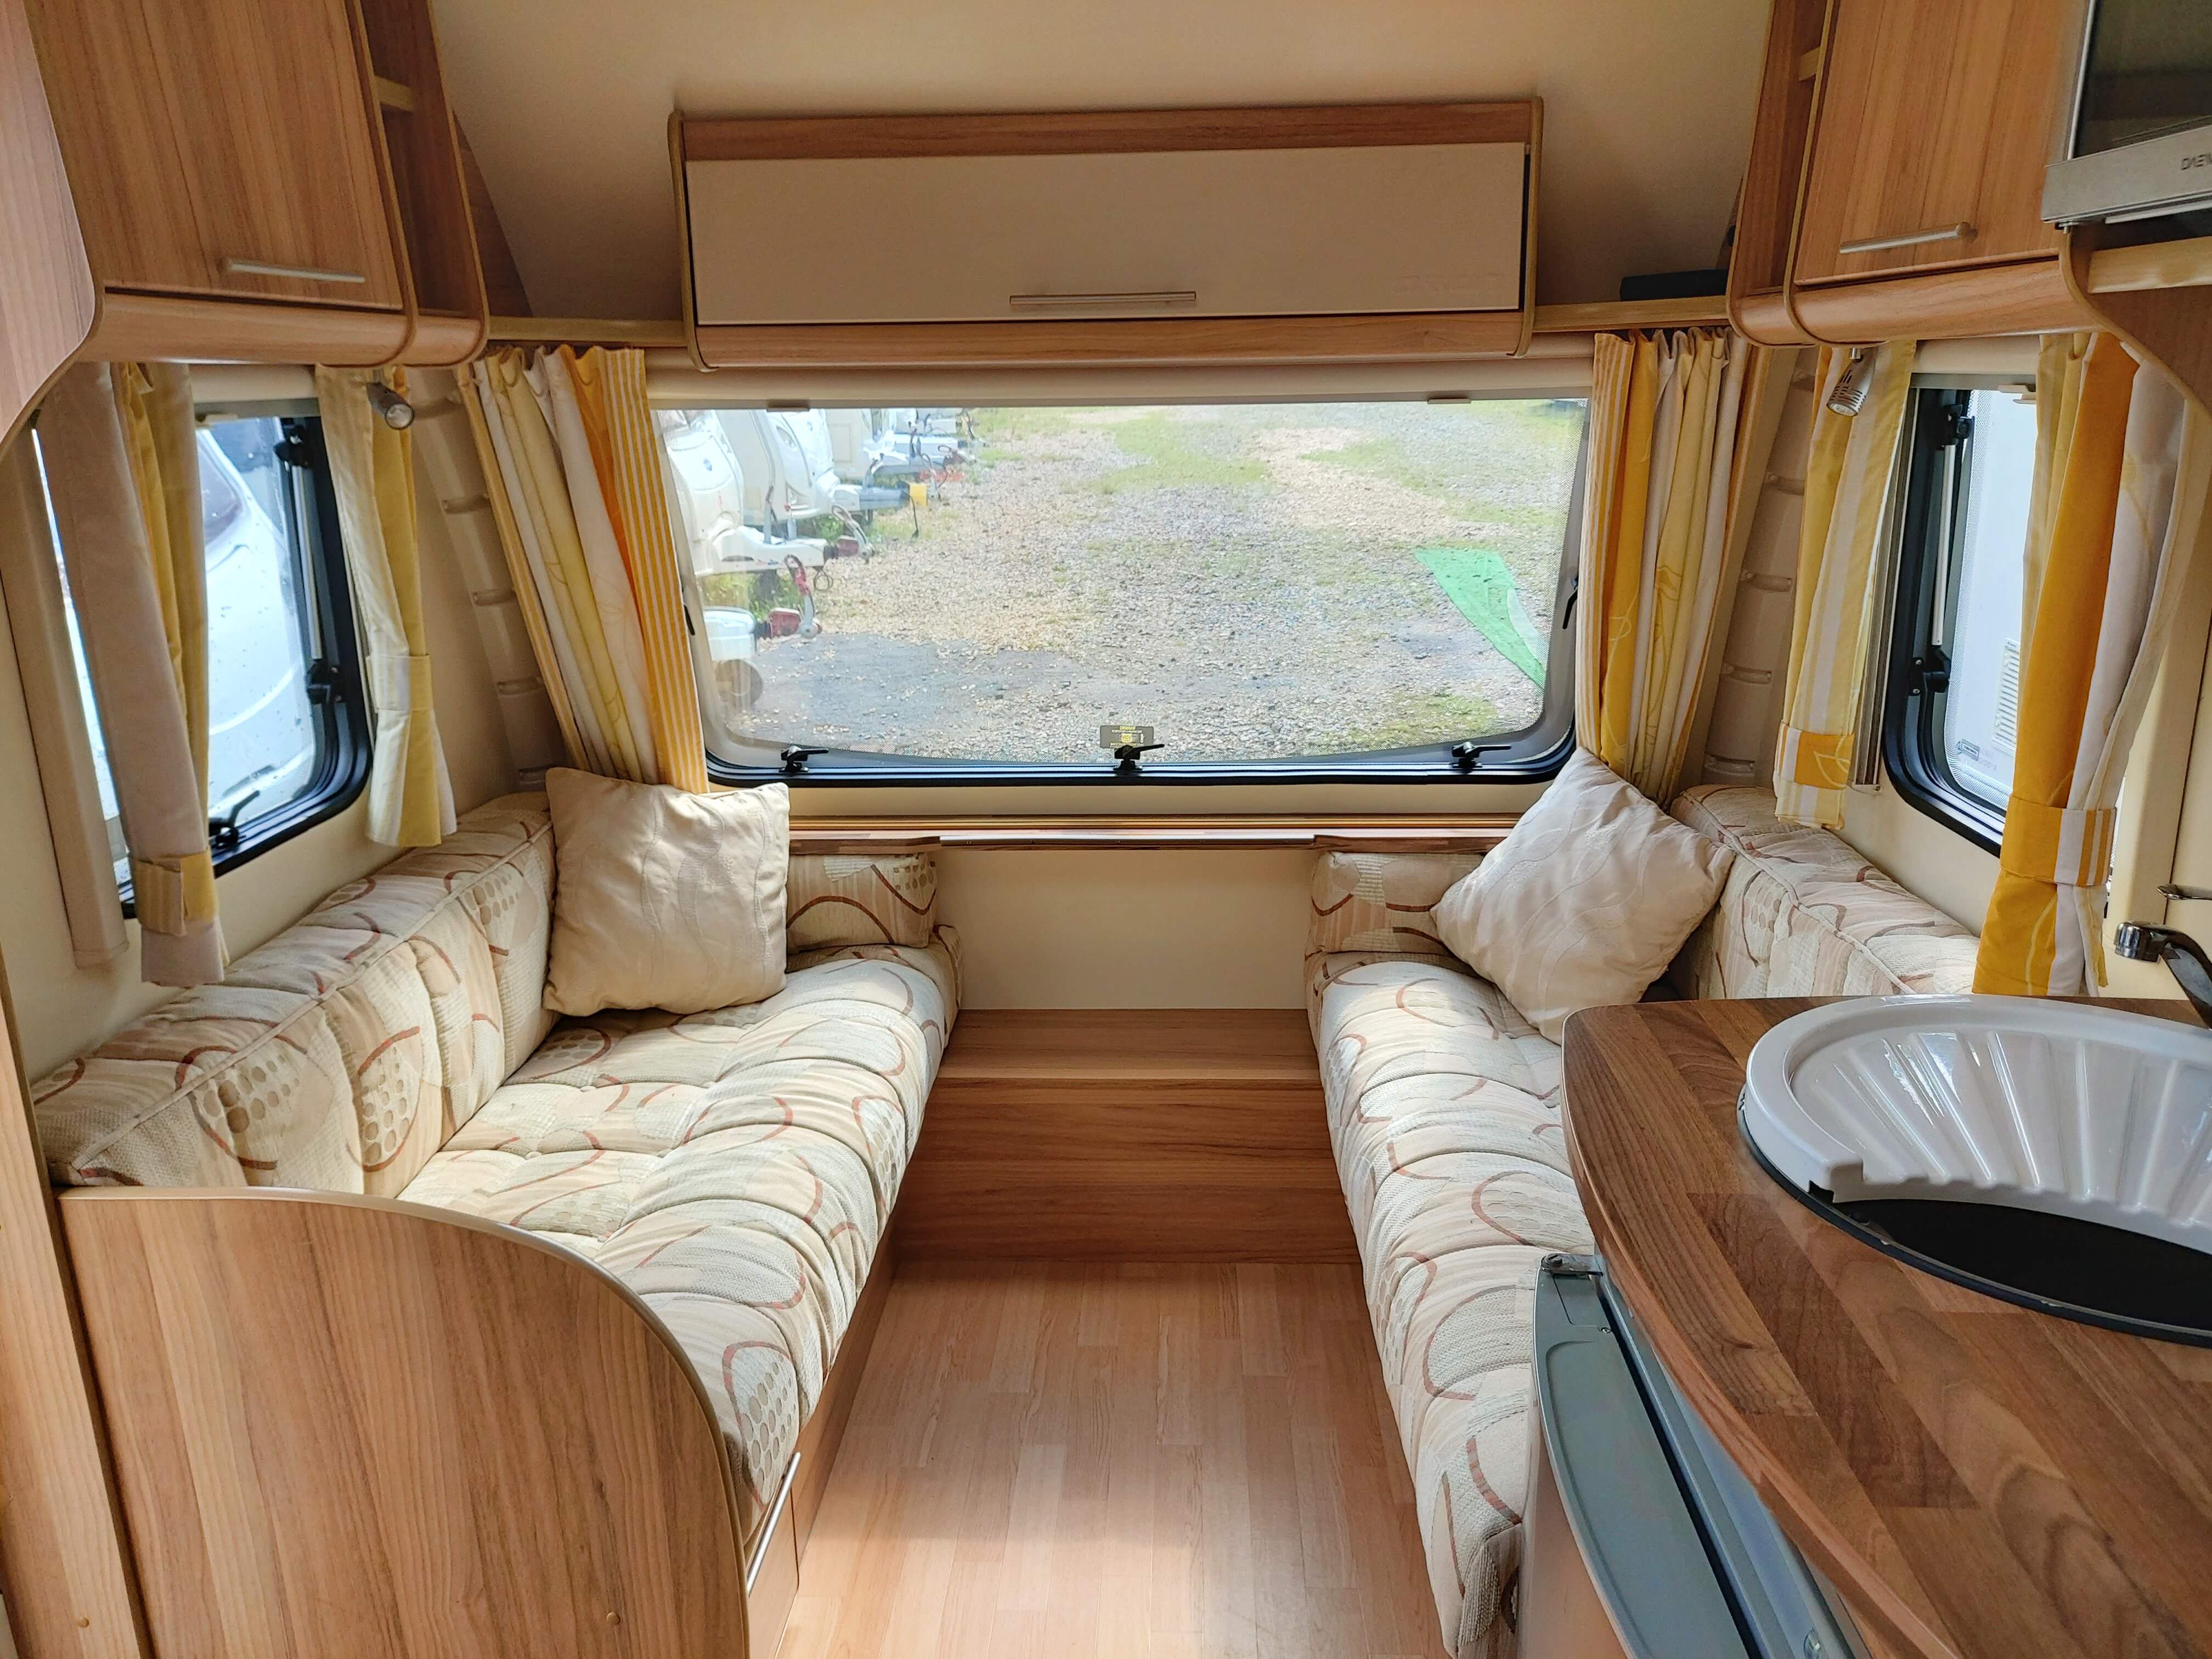 NOW SOLD 2011 Bailey Orion 430-4,FIXED BED End washroom Caravan with Motor Mover and Solar Panel